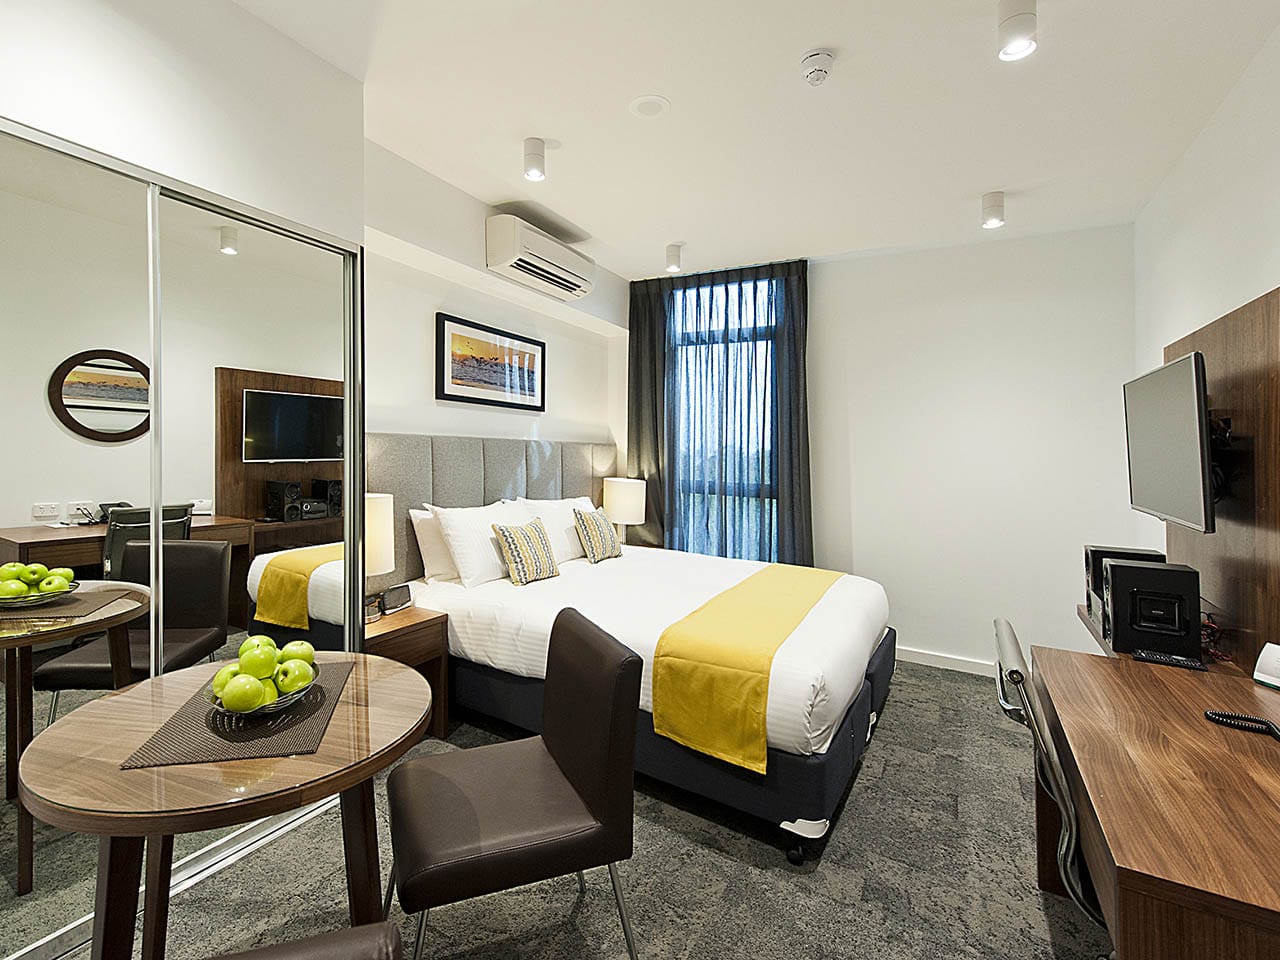 A Beautiful Hotel Bedroom With Flat Screen TV And Fruit Bowl.